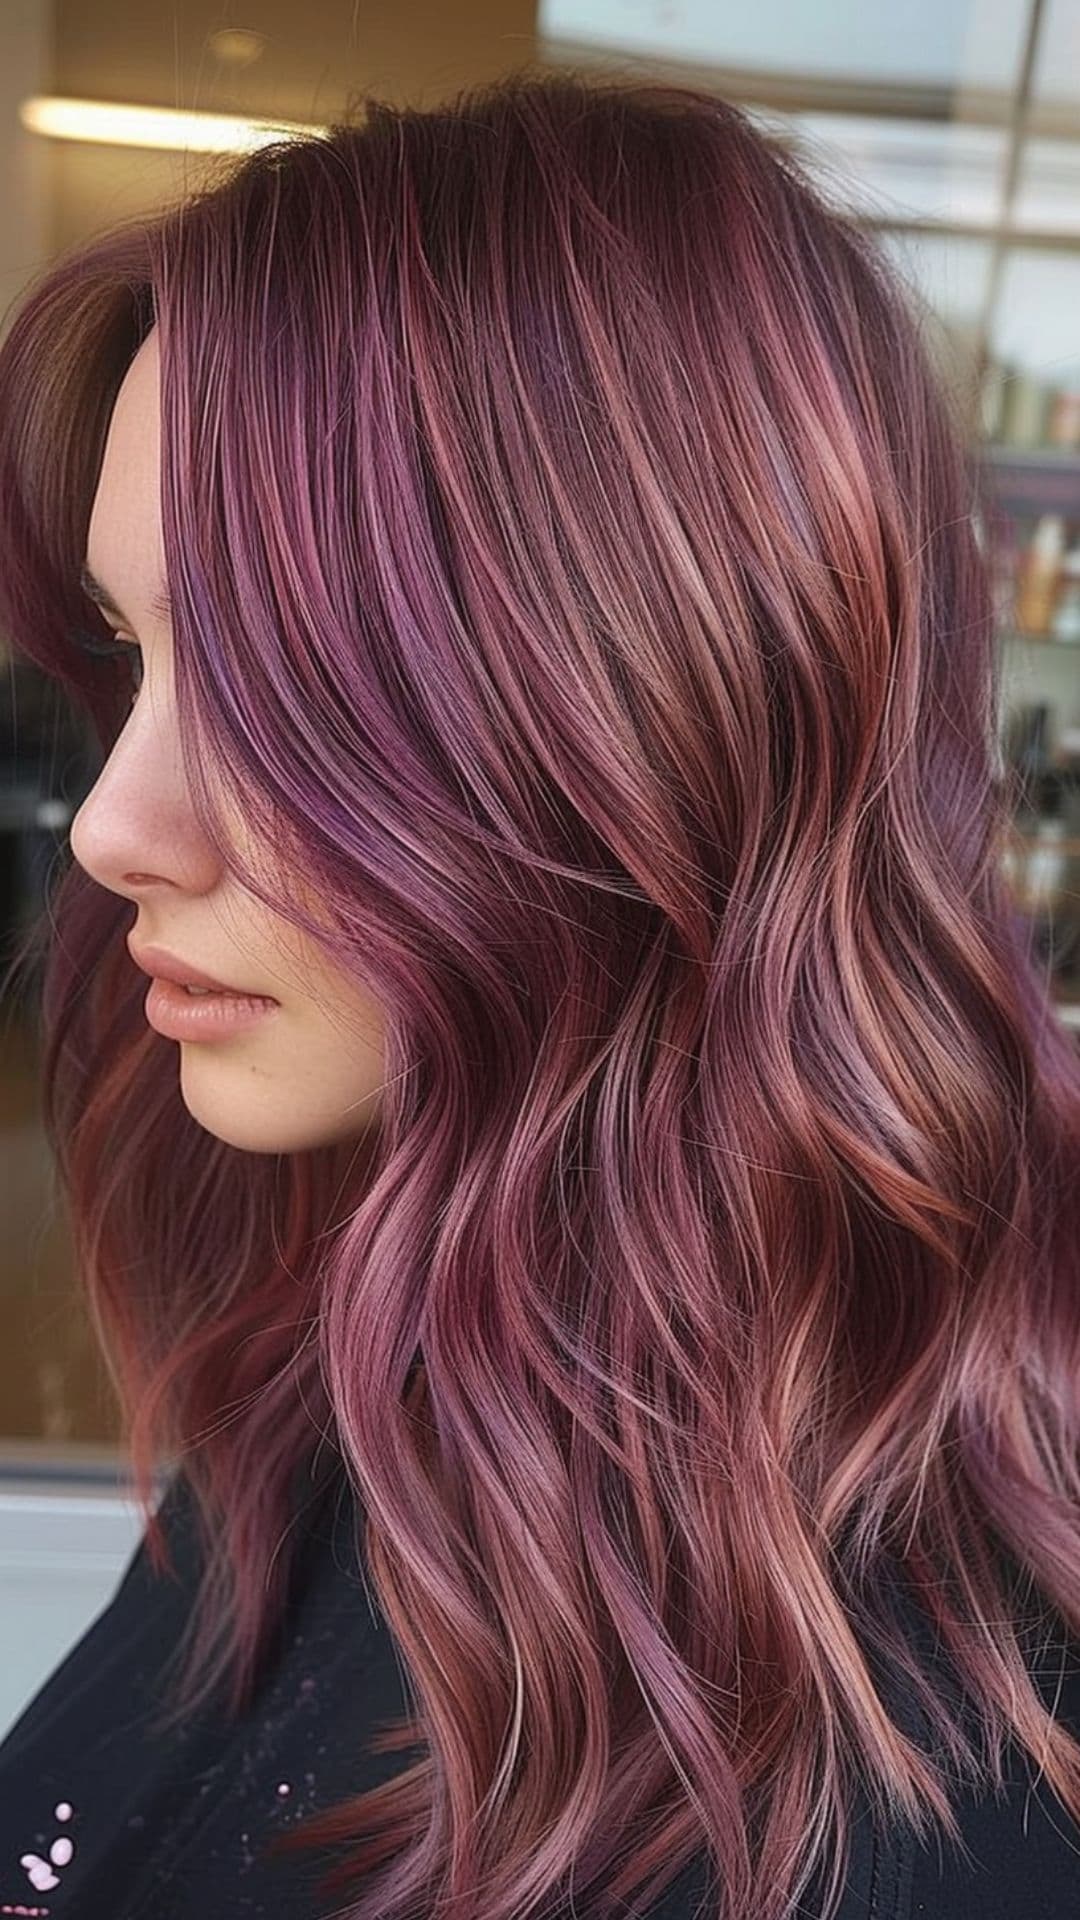 A woman modelling a rose violet hair.